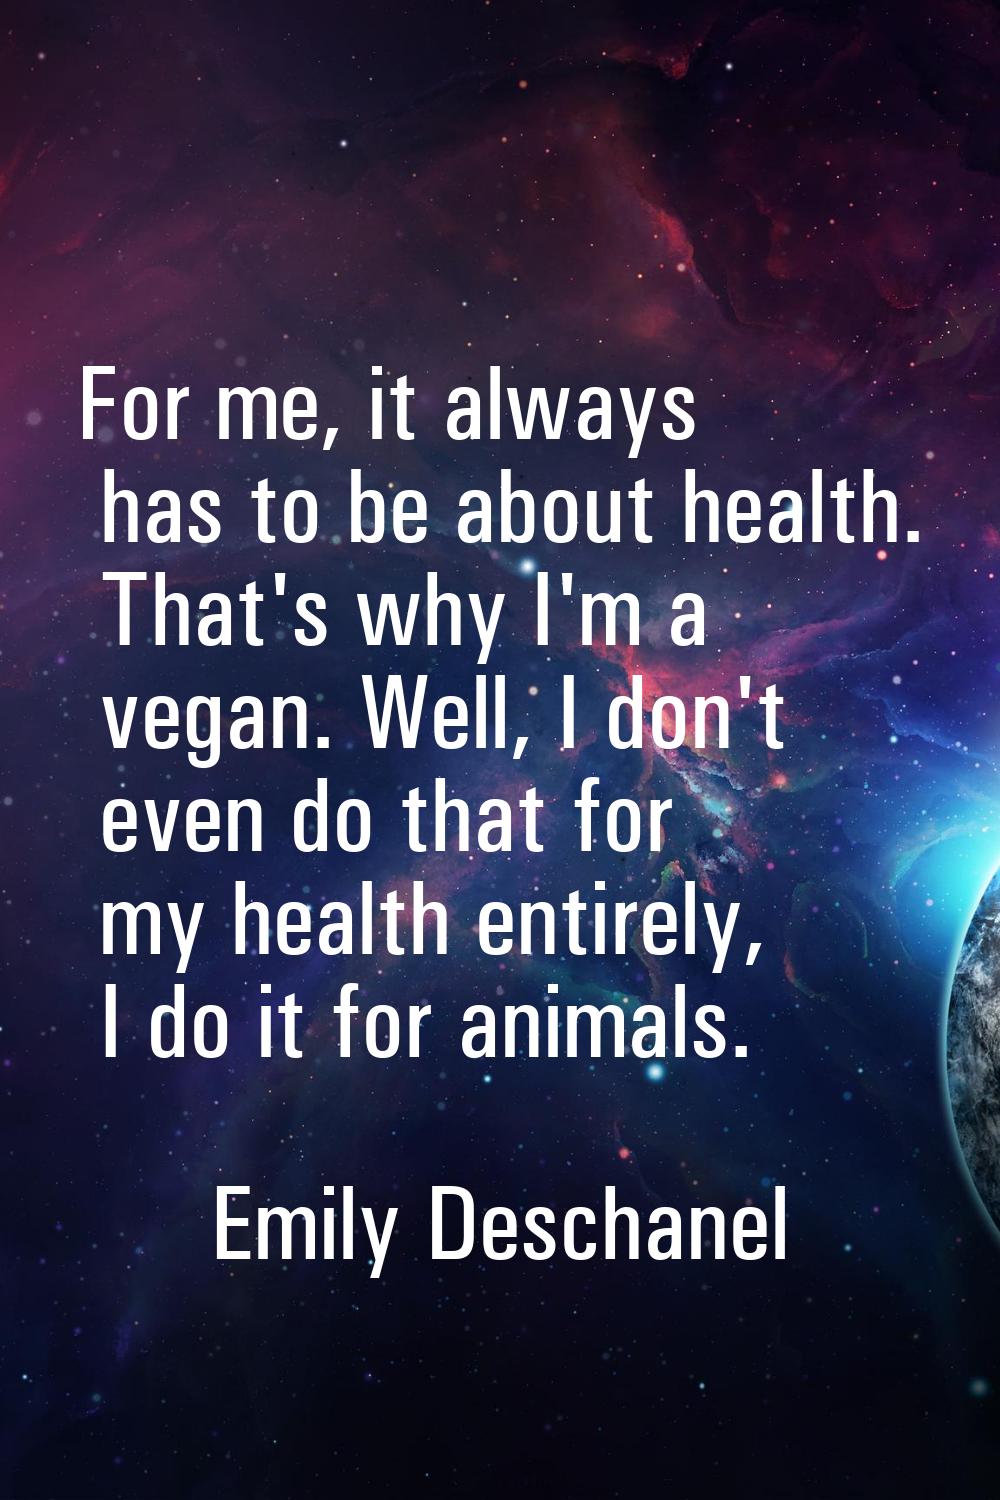 For me, it always has to be about health. That's why I'm a vegan. Well, I don't even do that for my